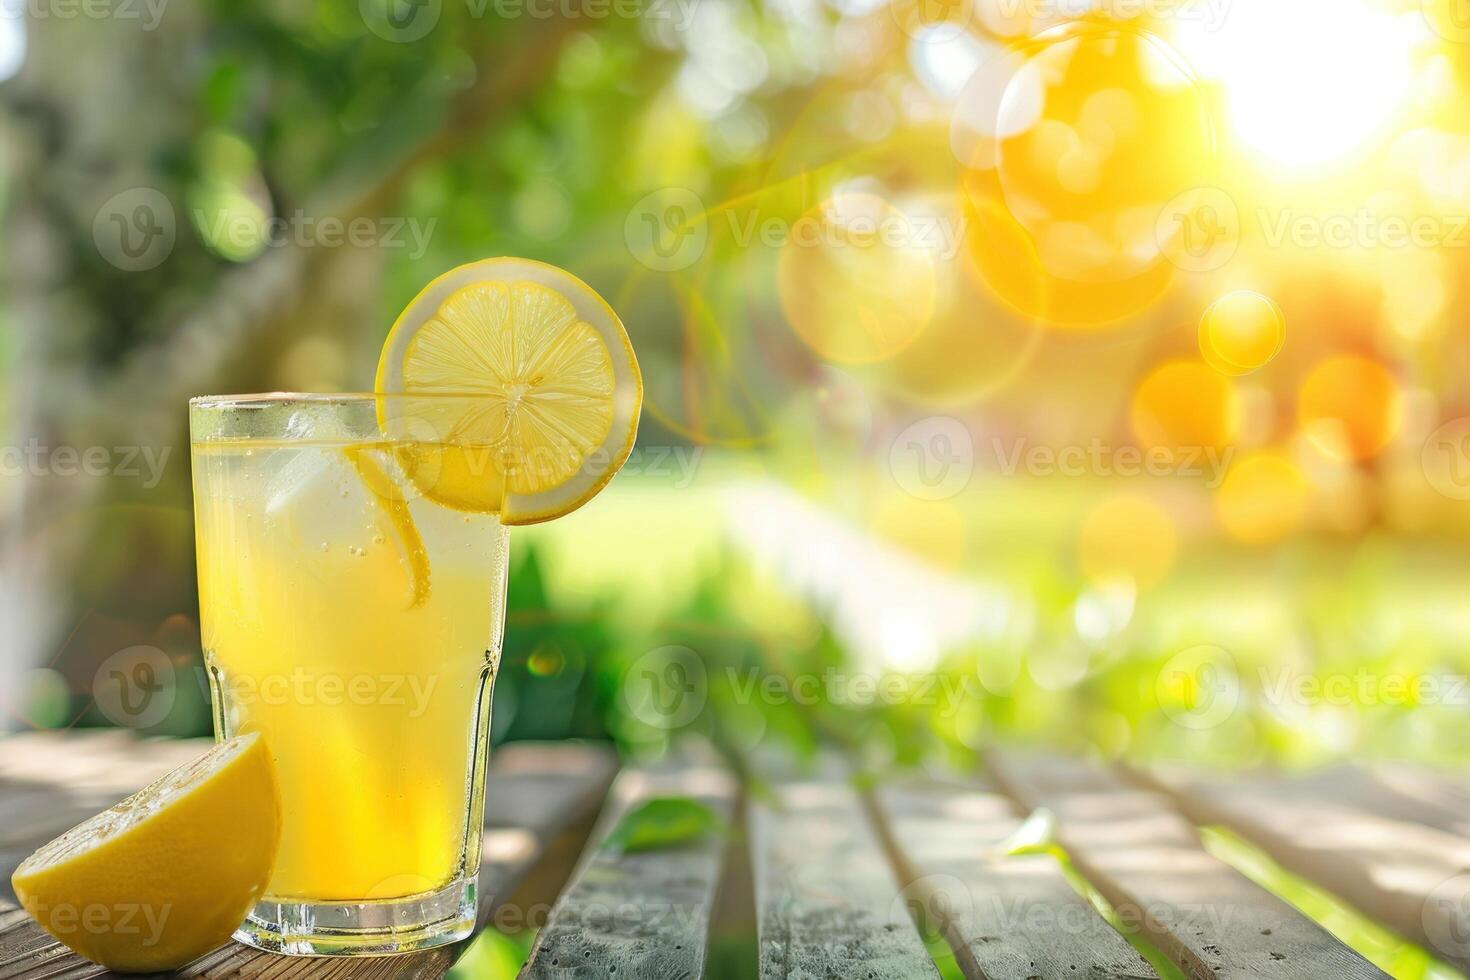 A glass of lemonade with a straw in it and a slice of lemon on the side photo